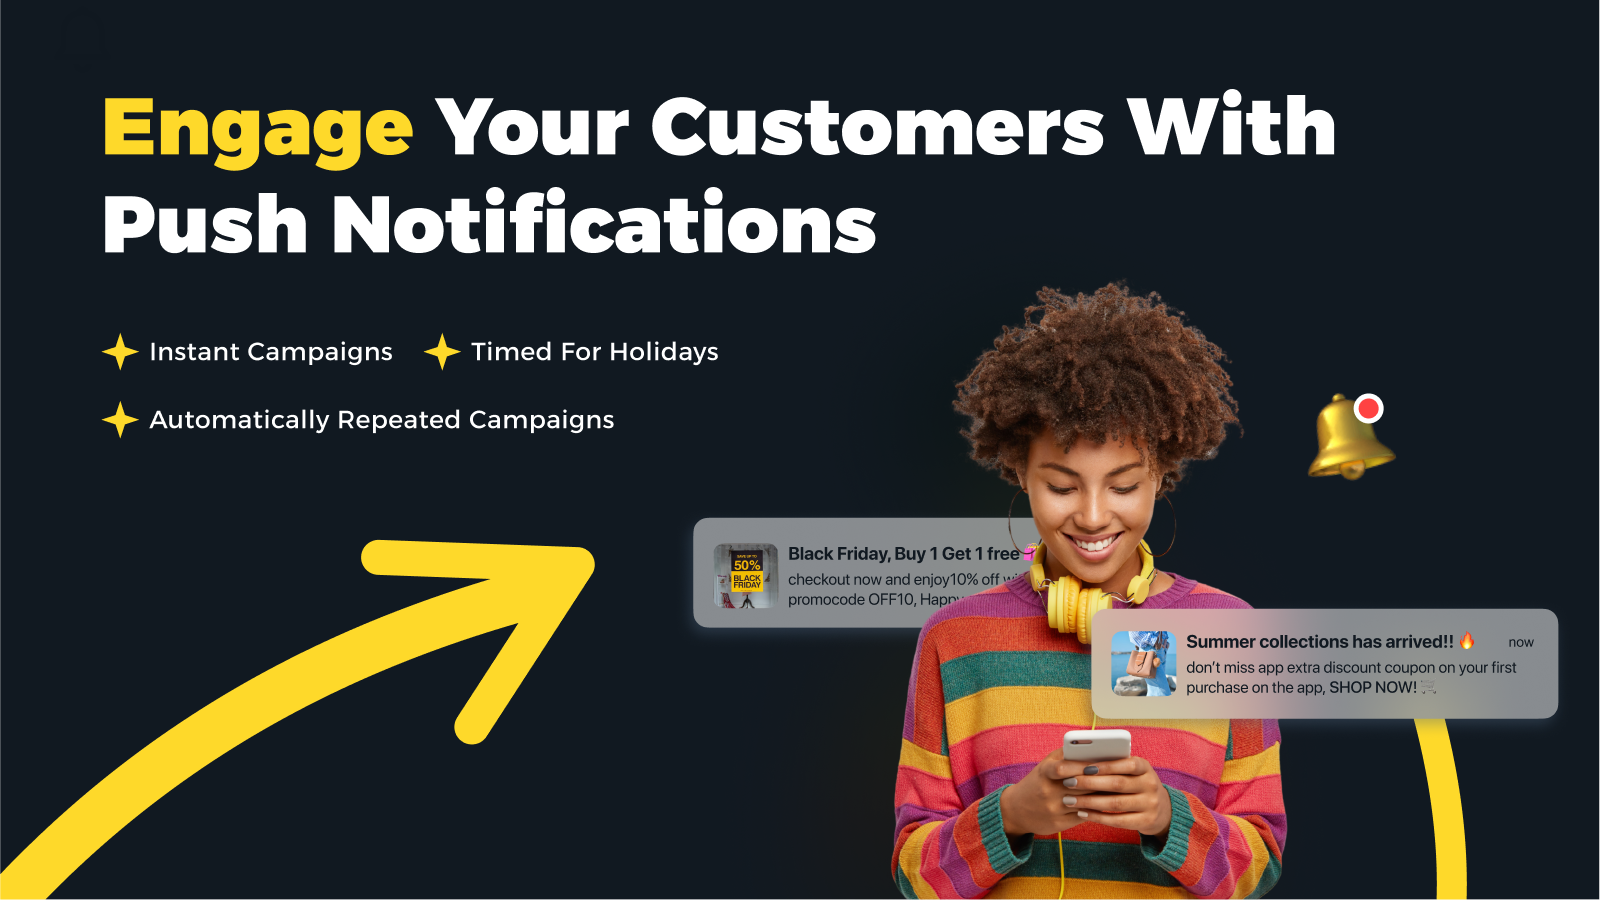 Engage you customers with push notifications